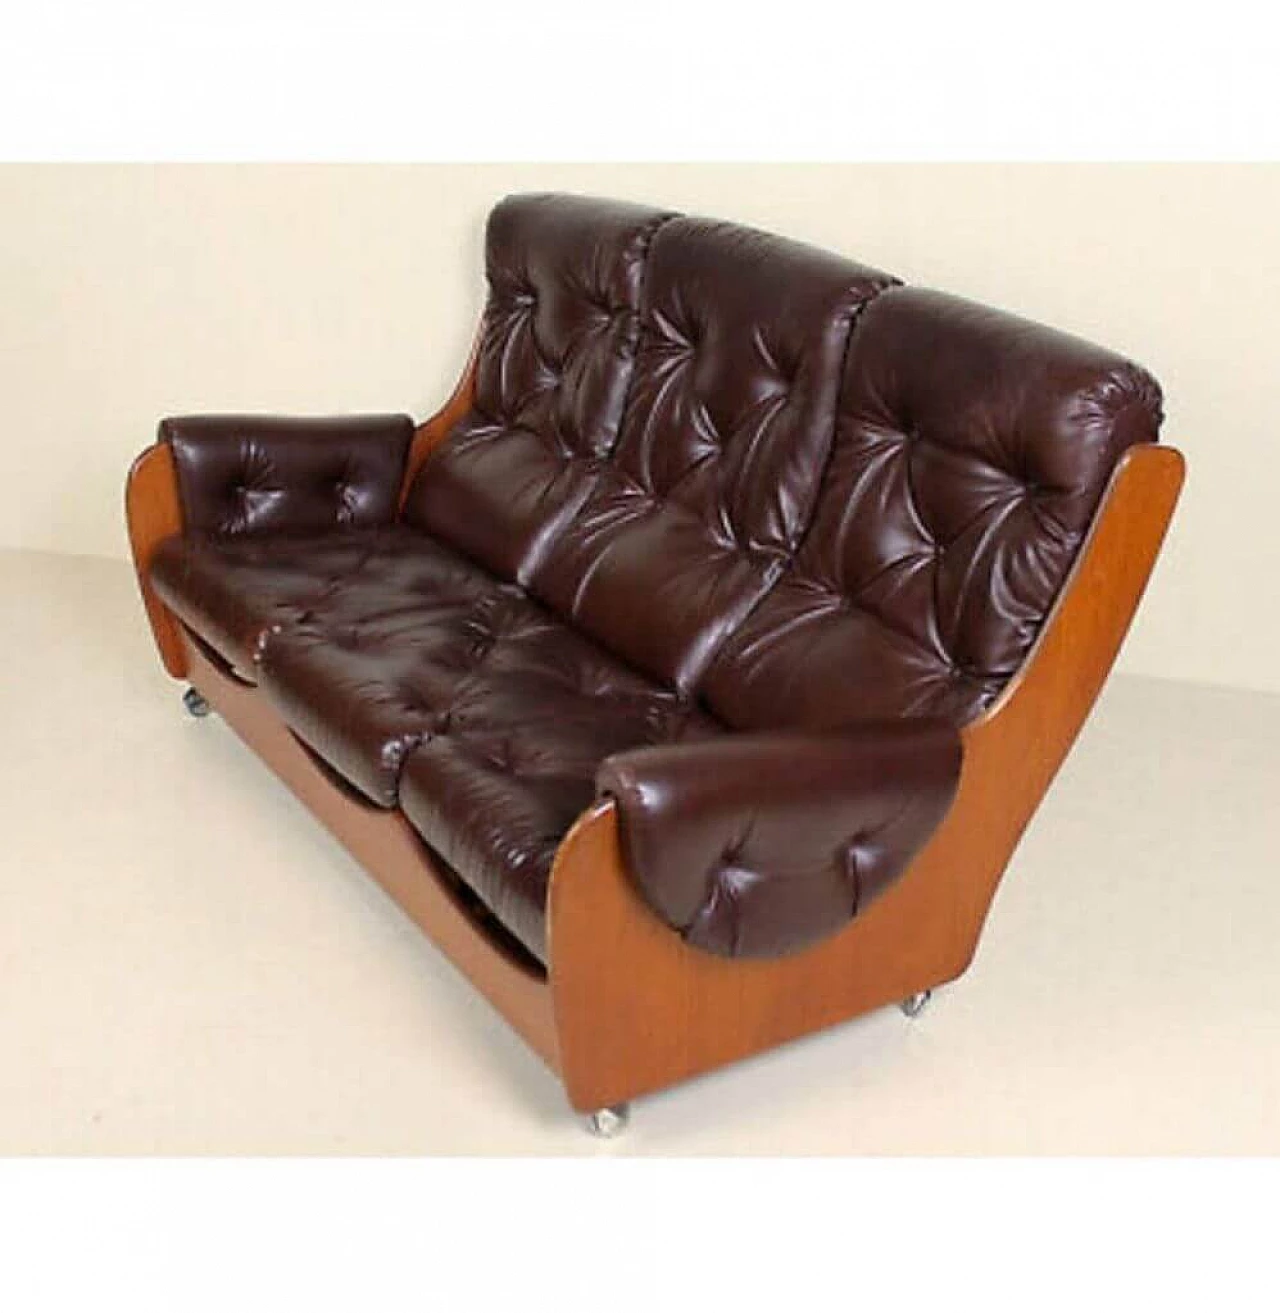 English leather and teak sofa by G. Plan, '70s 1191898